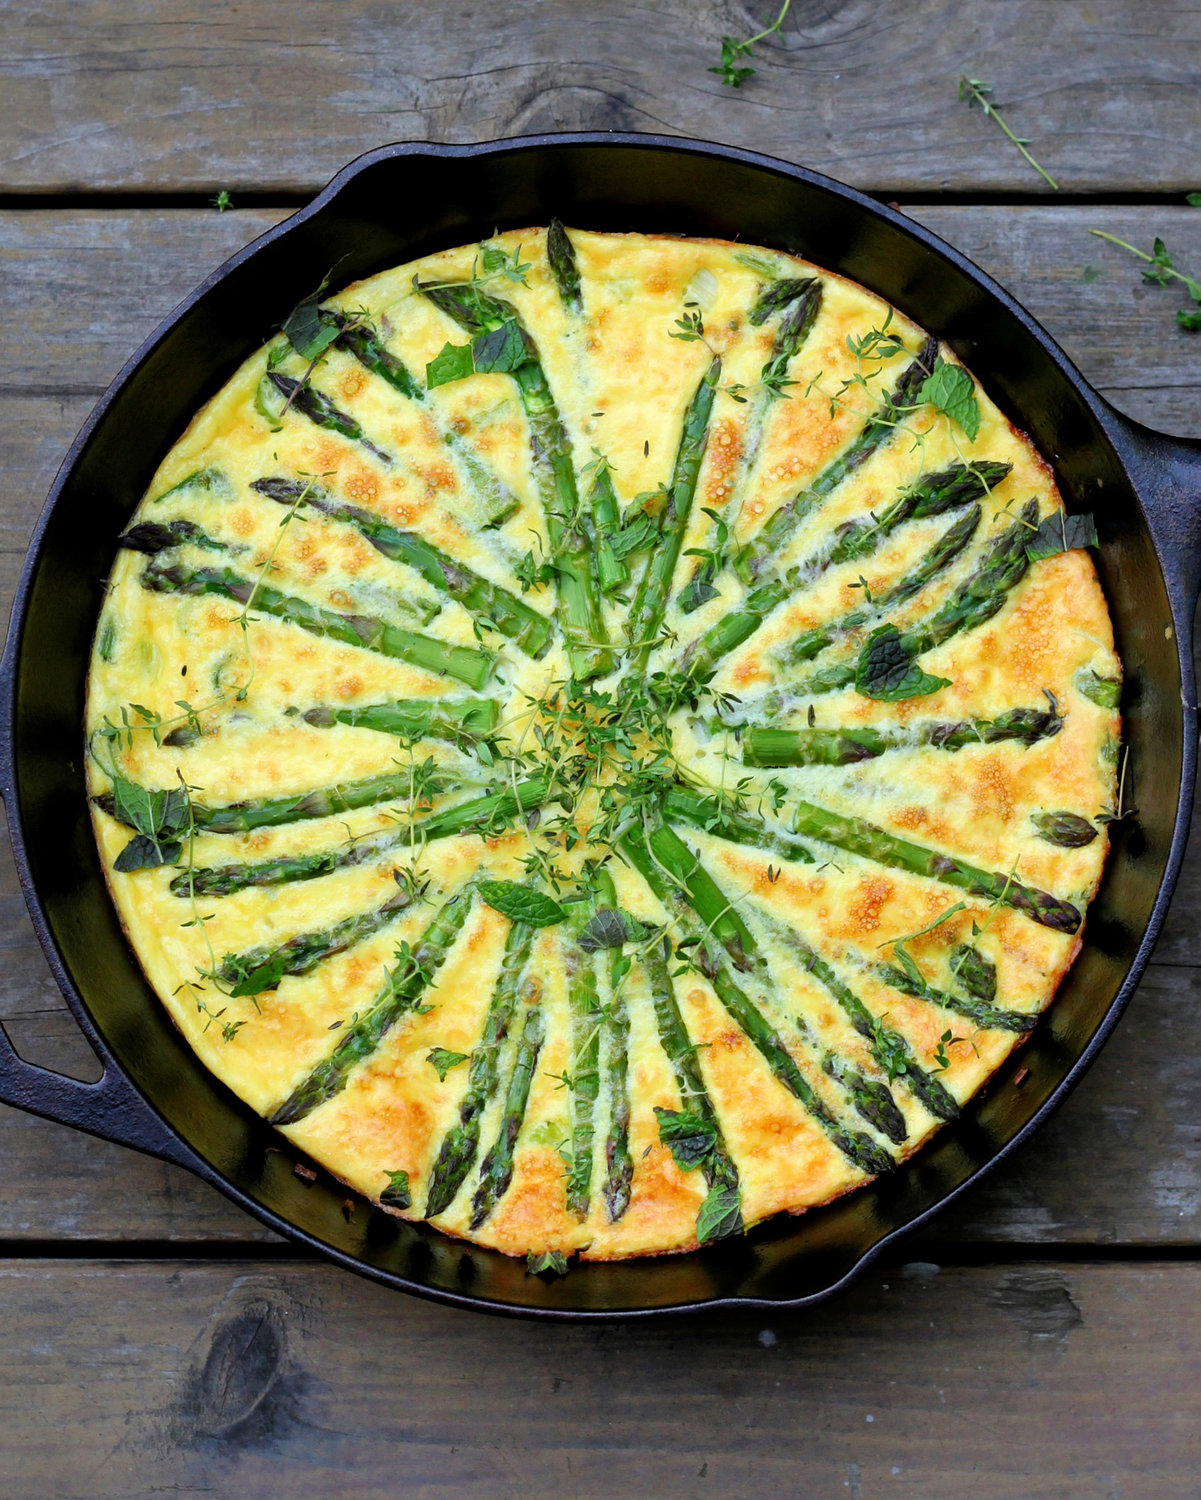 A frittata is a light and fluffy baked egg dish, a hybrid of an omelet and a quiche.